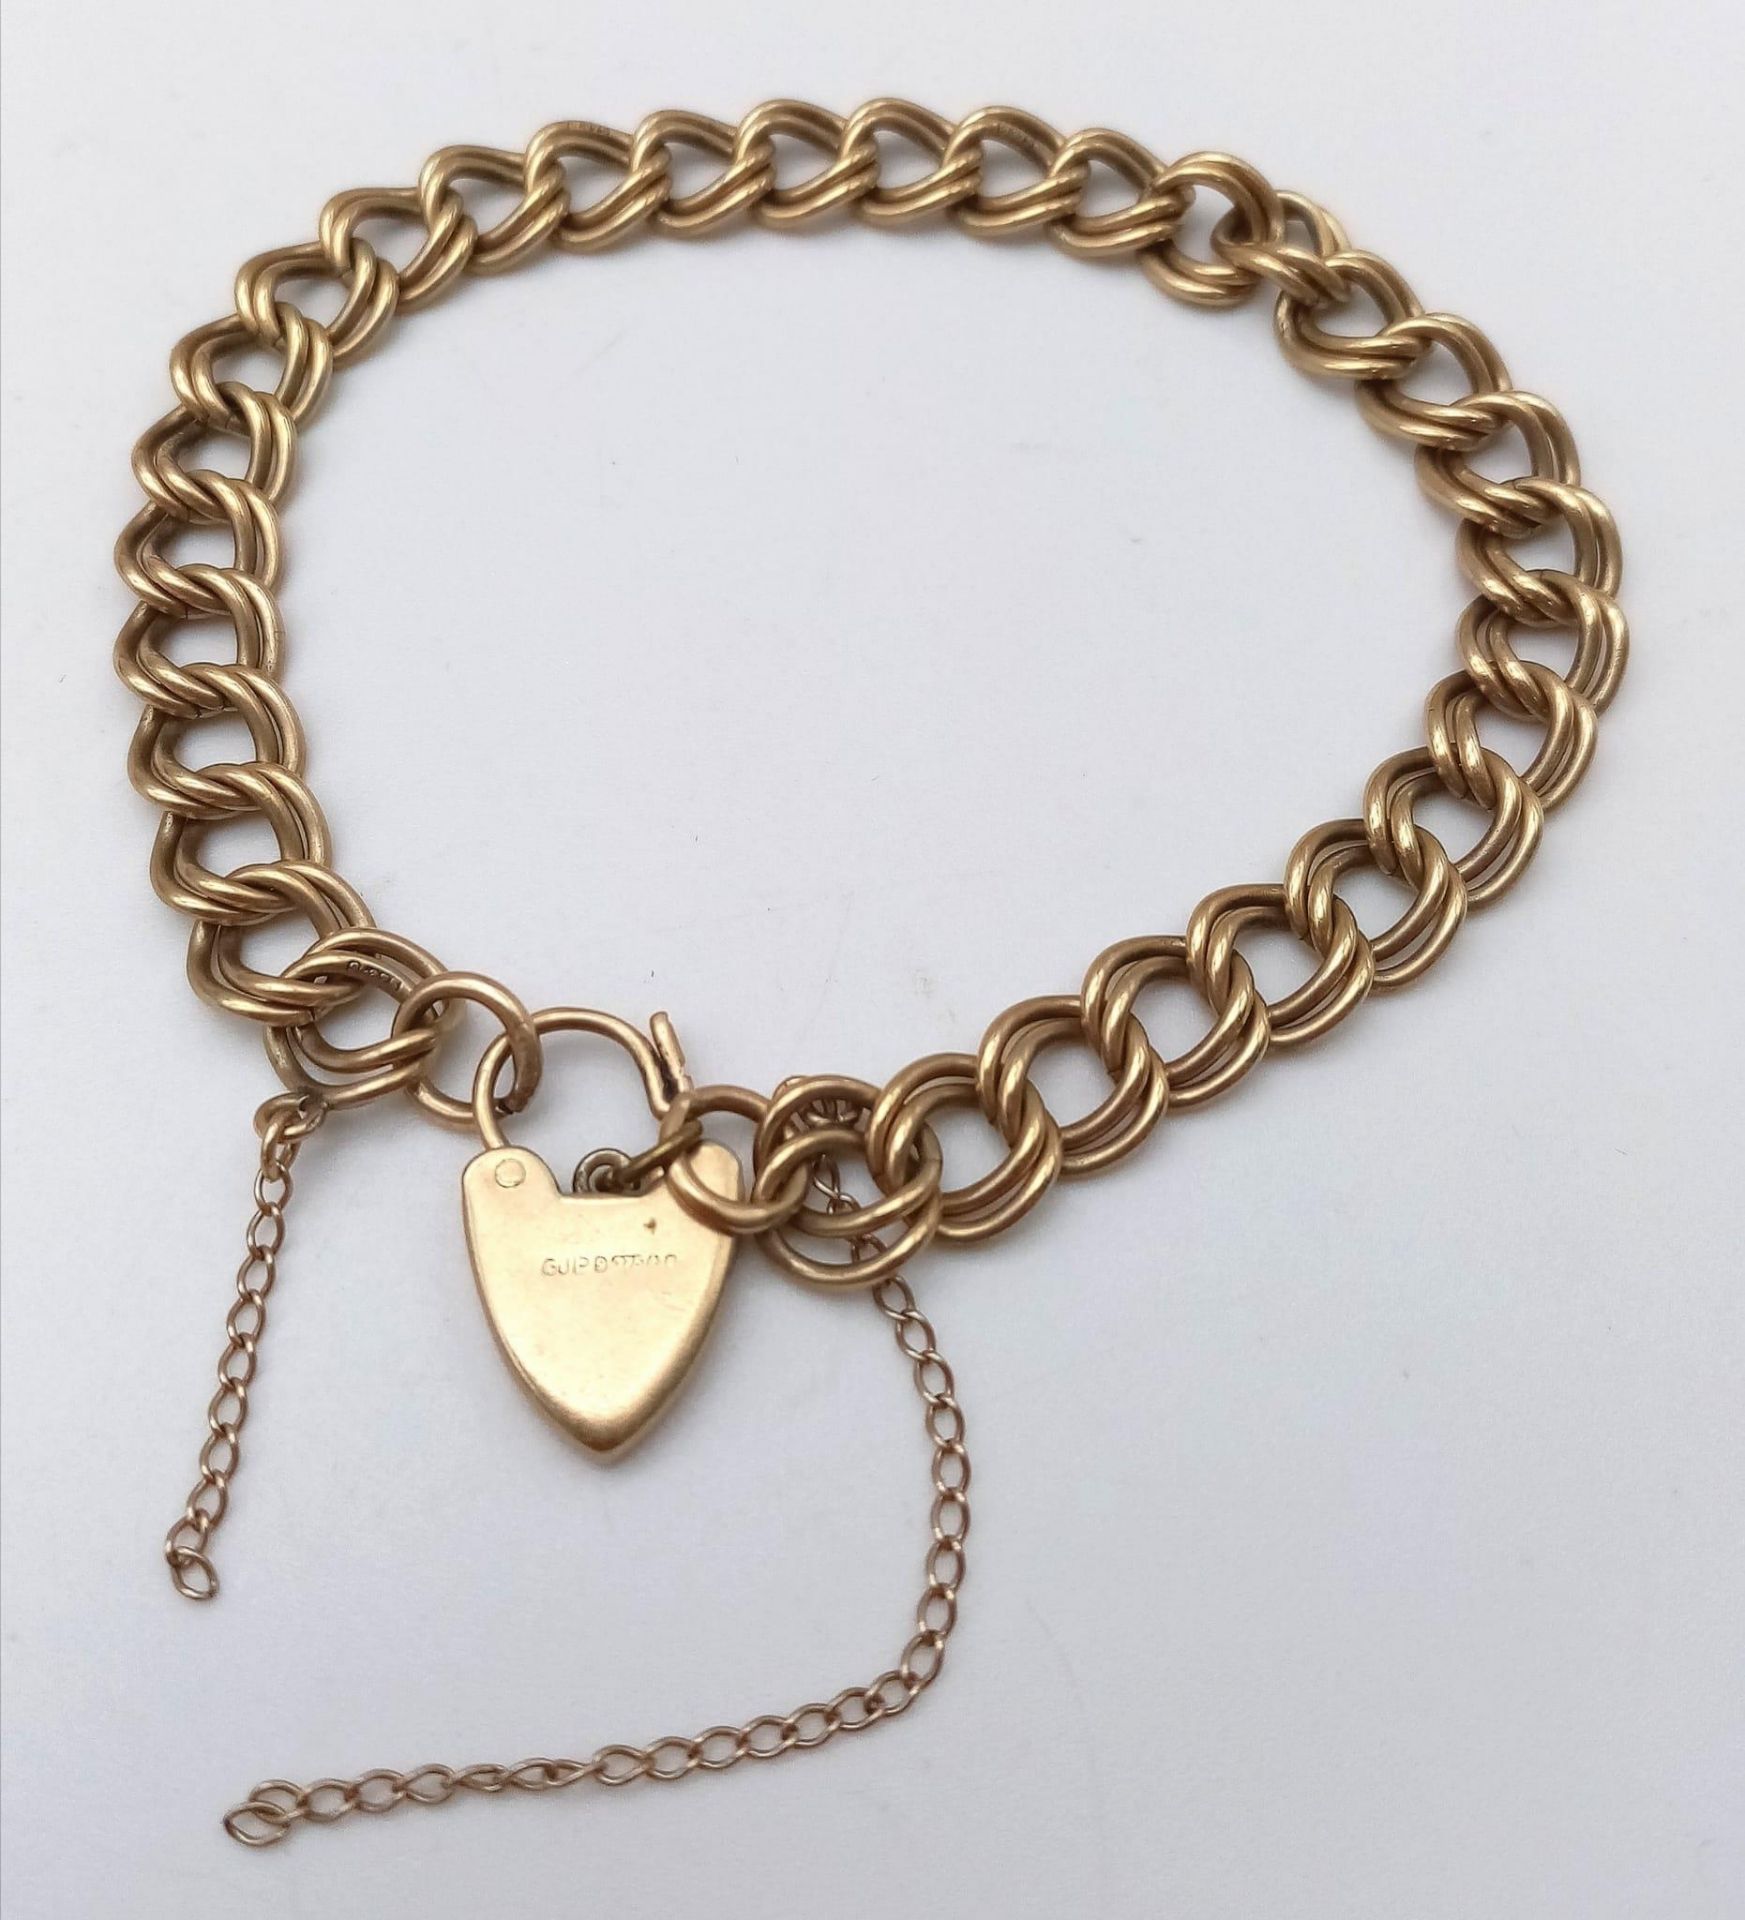 A Vintage 9K Yellow Gold Double Curb Link Bracelet with Heart Clasp. 17cm. 13.54g weight. - Image 2 of 6